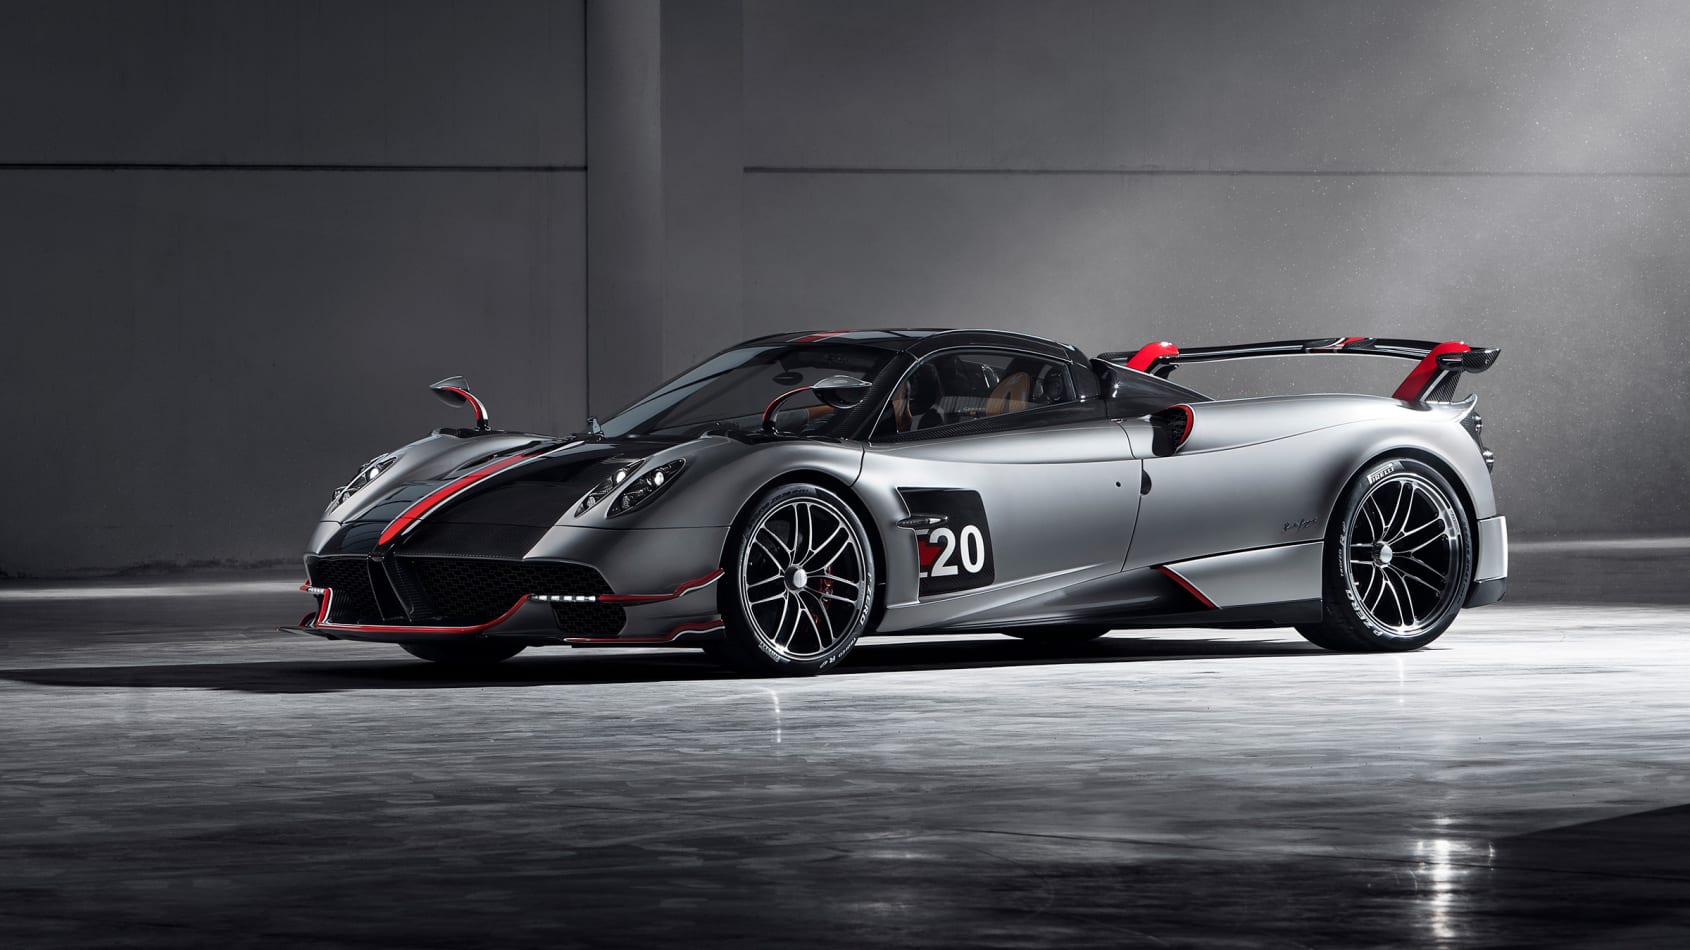 This is how Horacio Pagani defines a beautiful hypercar